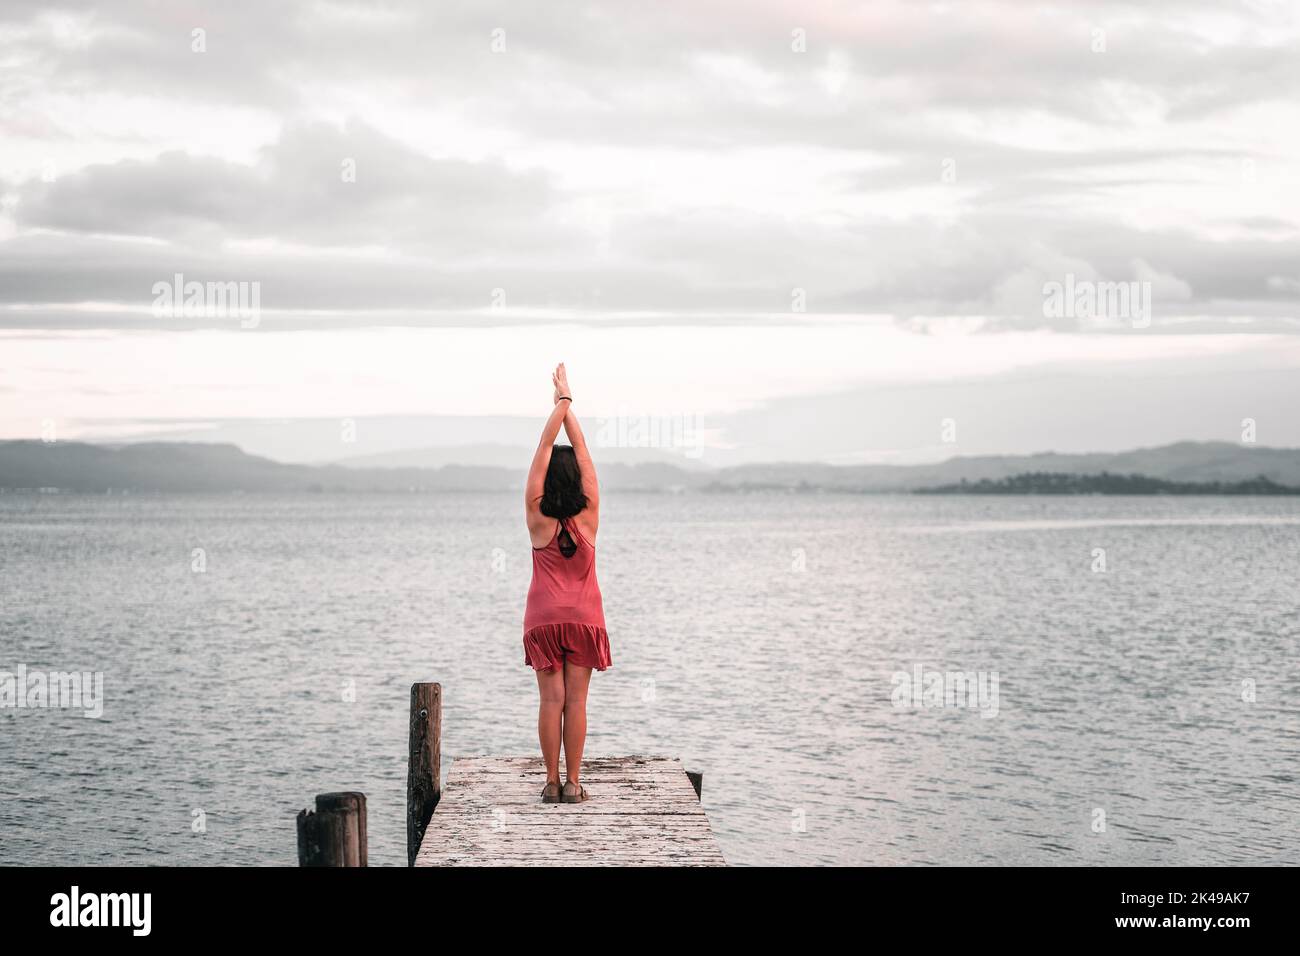 Caucasian young woman wearing black bracelet pink dress and sandals standing with feet together and arms outstretched upwards at end of wooden pier Stock Photo